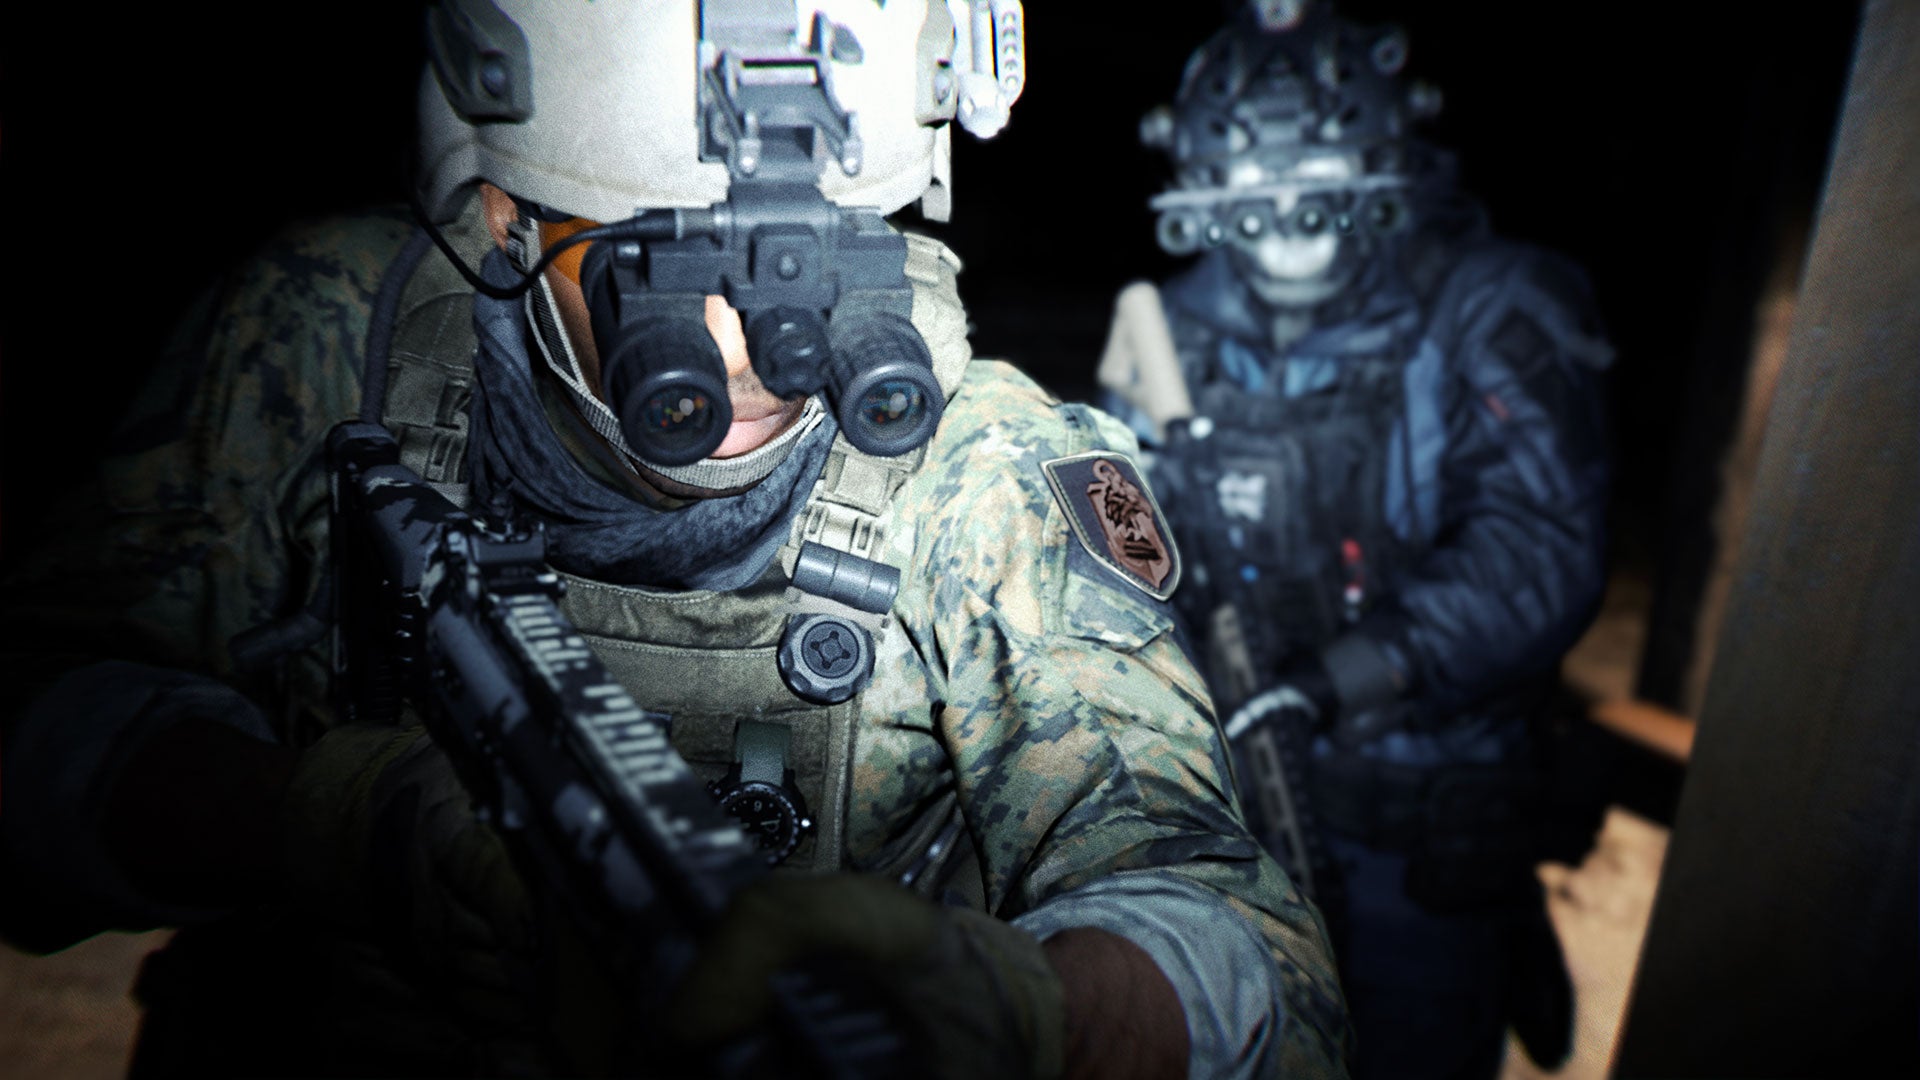 Two soldiers in Modern Warfare 2 wearing night vision goggles in a corner one after the other.